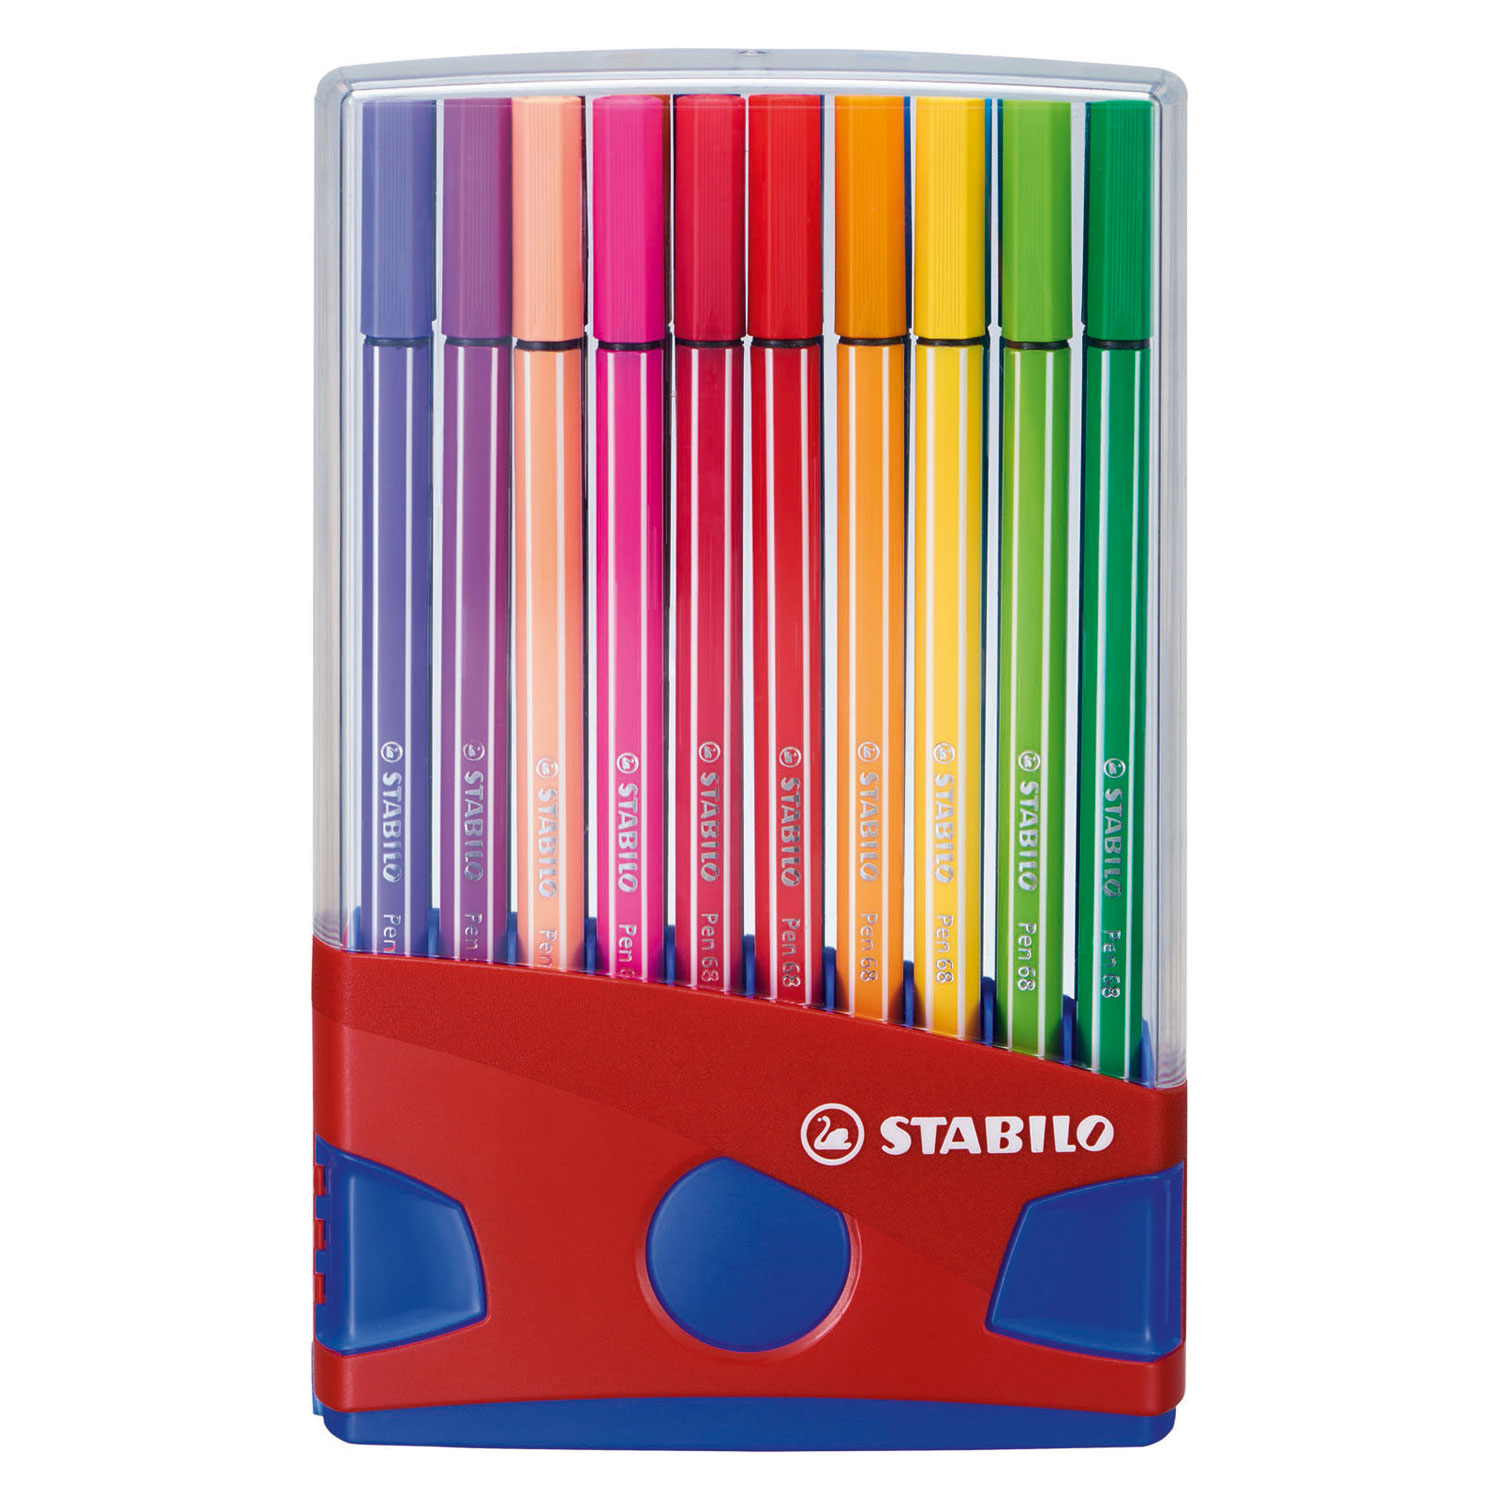 rem Heiligdom echo STABILO Pen 68 Colorparade Rood, 20st. online ... | Lobbes Speelgoed